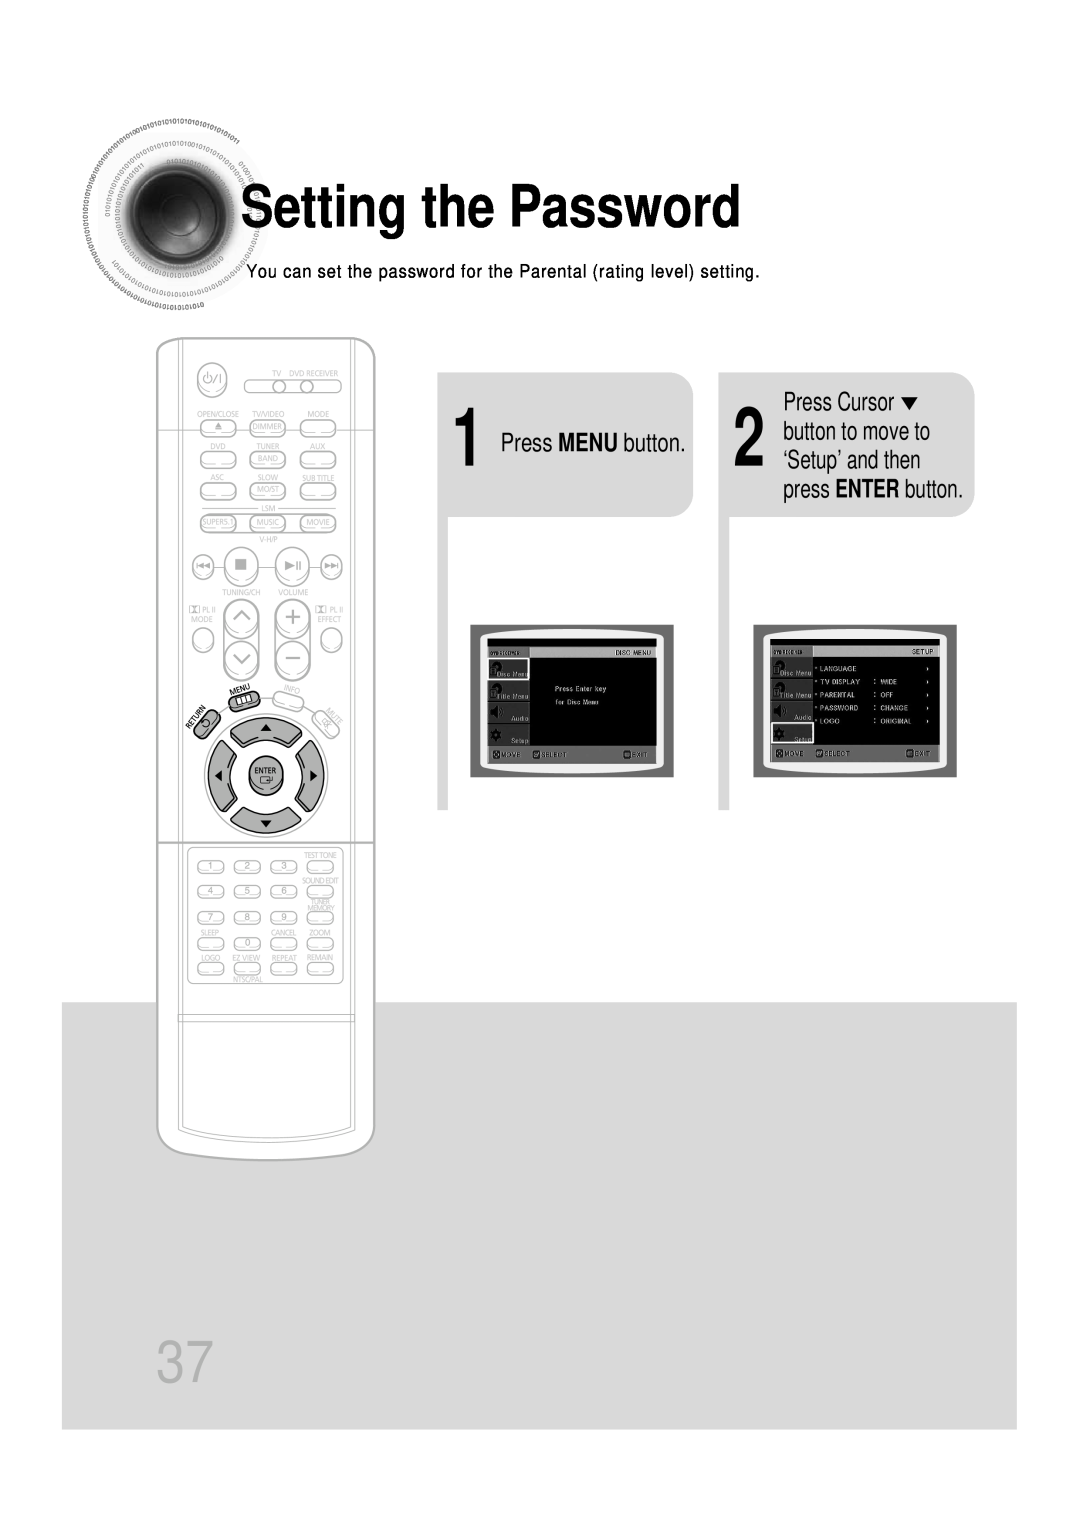 Samsung HT-DB350, HT-DB1650 instruction manual Setting the Password, 1 2 button to move to Press MENU button, Press Cursor 